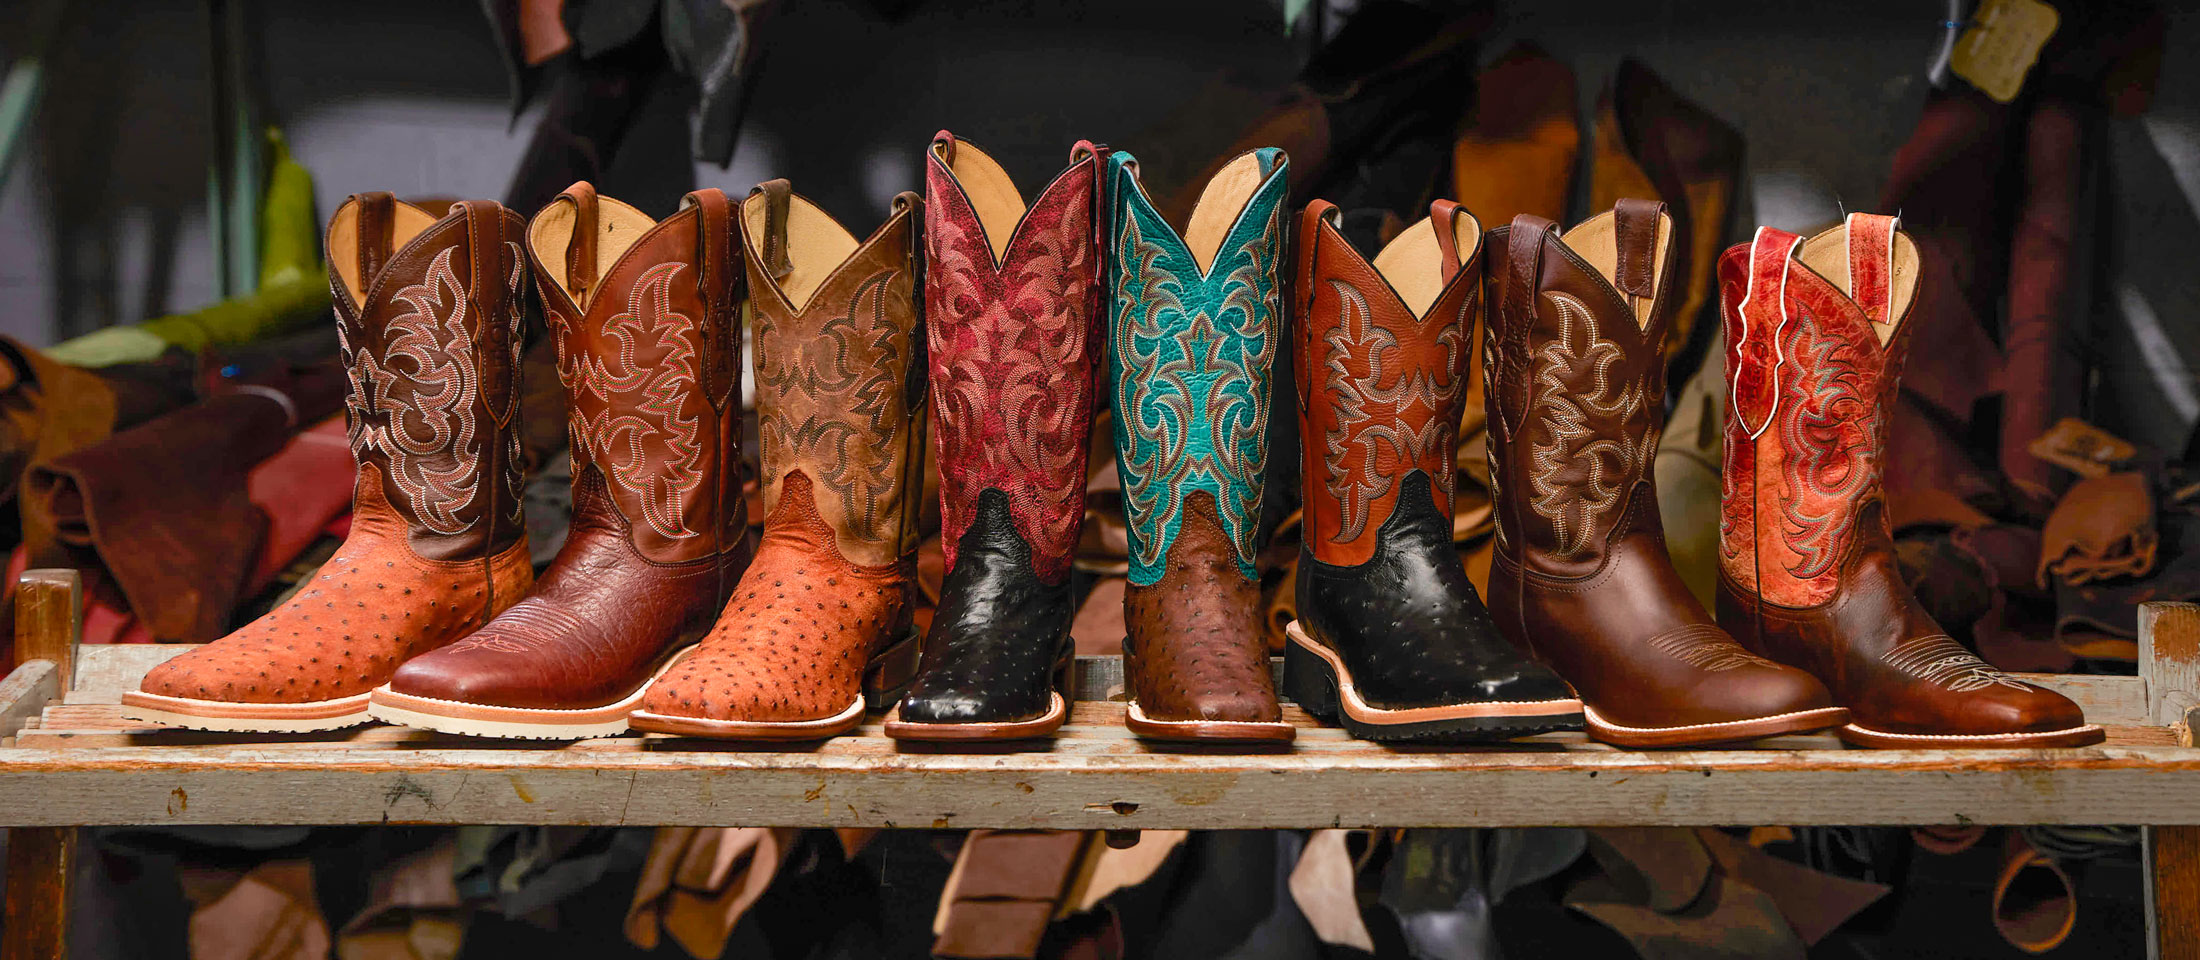 A fan image of AQHA-styled boots posed in front of different types of boot leathers.